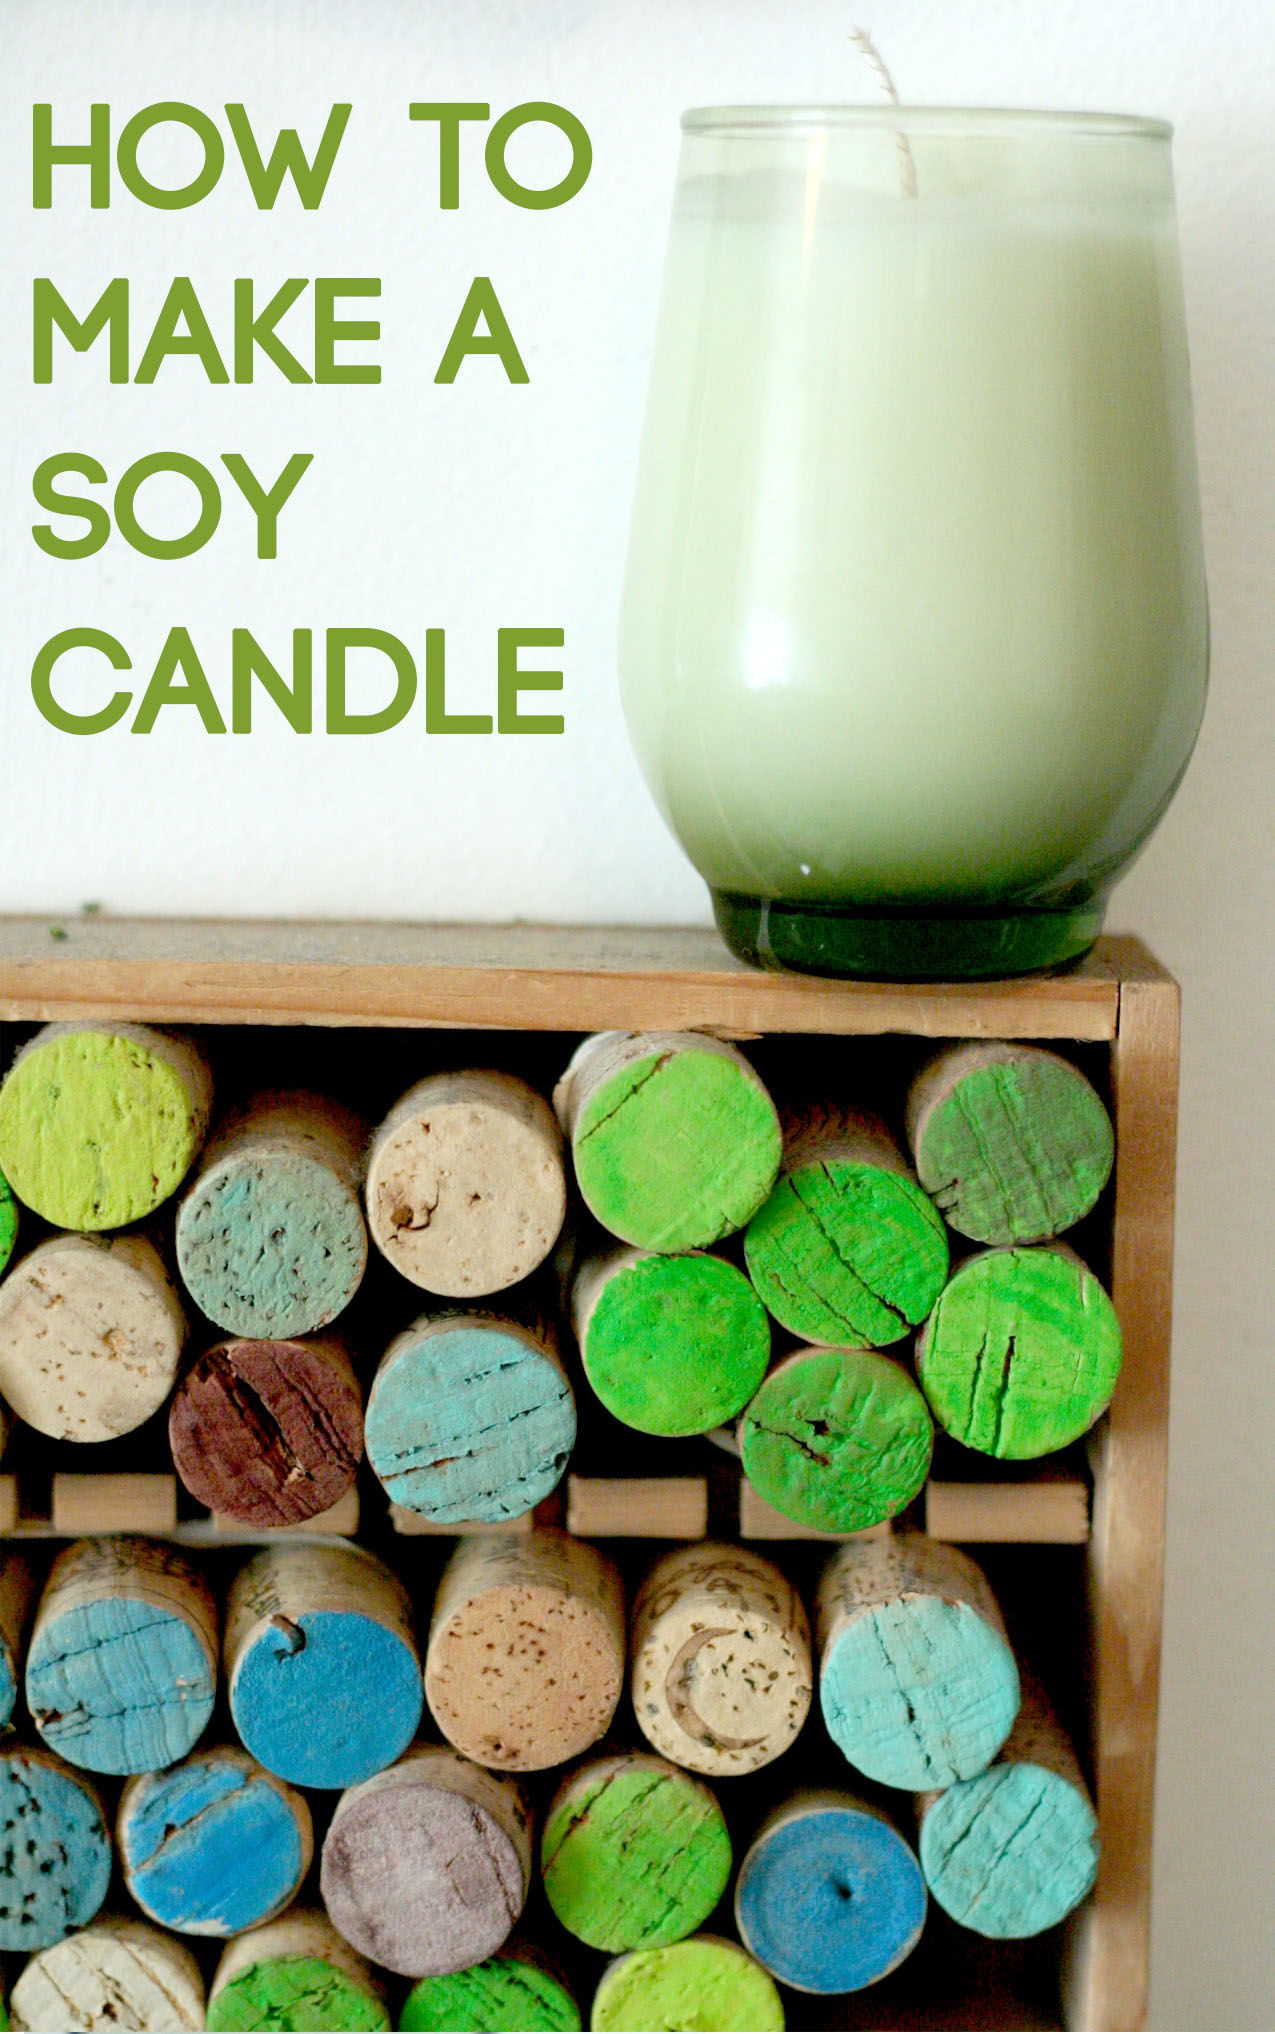 4-how-to-make-pour-craft-diy-soy-candle-dear-handmade-life